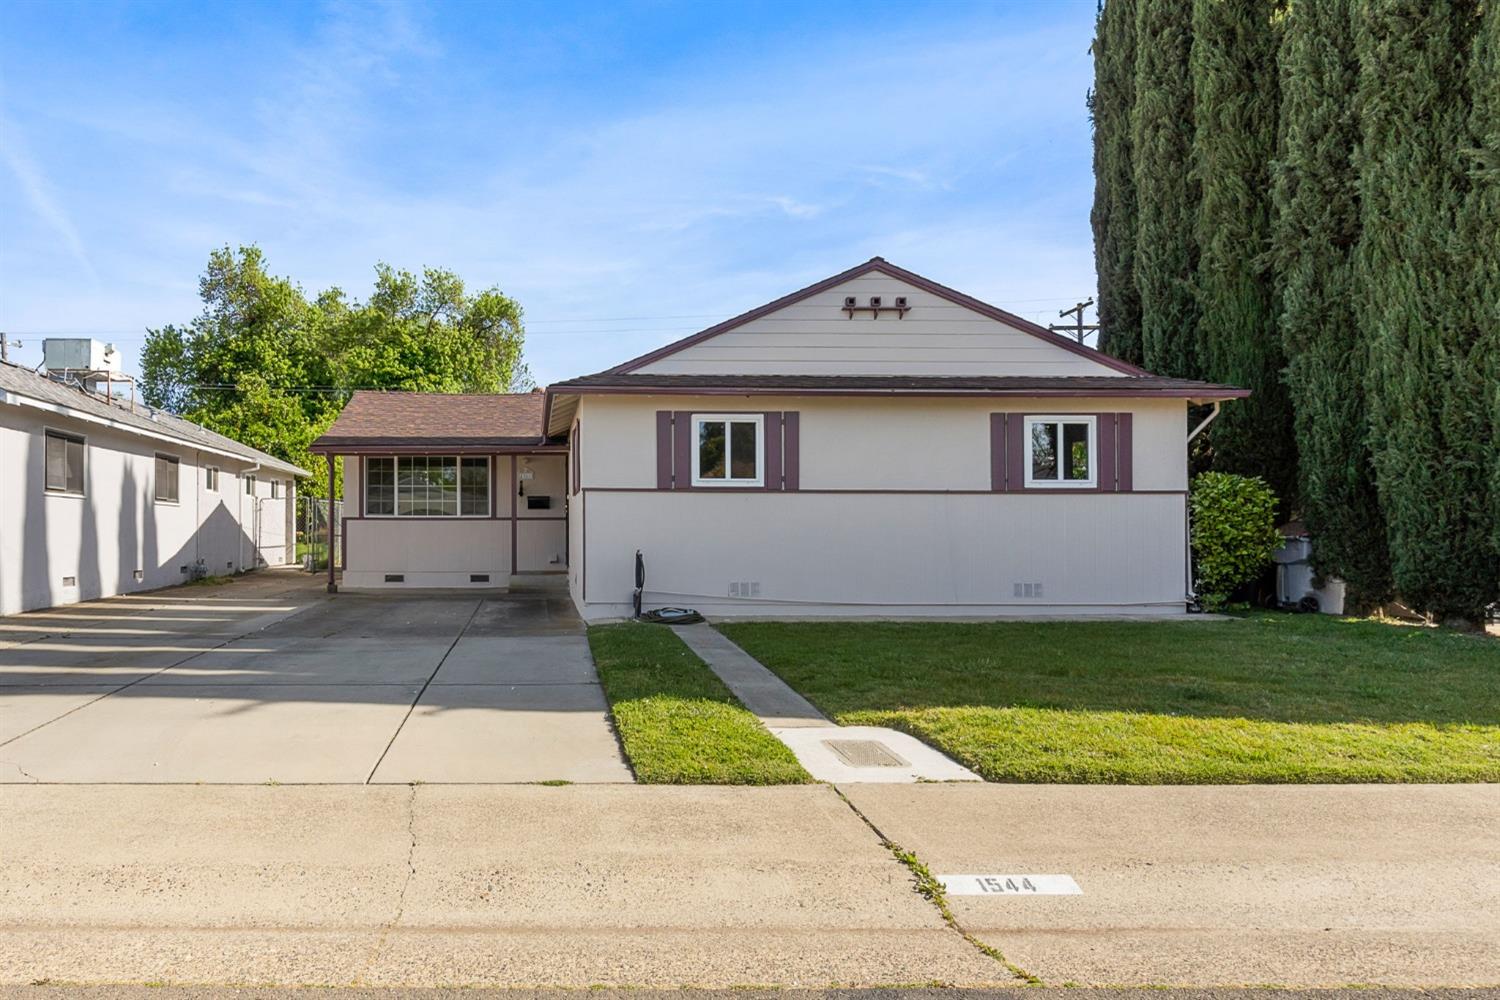 Photo of 1544 Portsmouth Ave in West Sacramento, CA